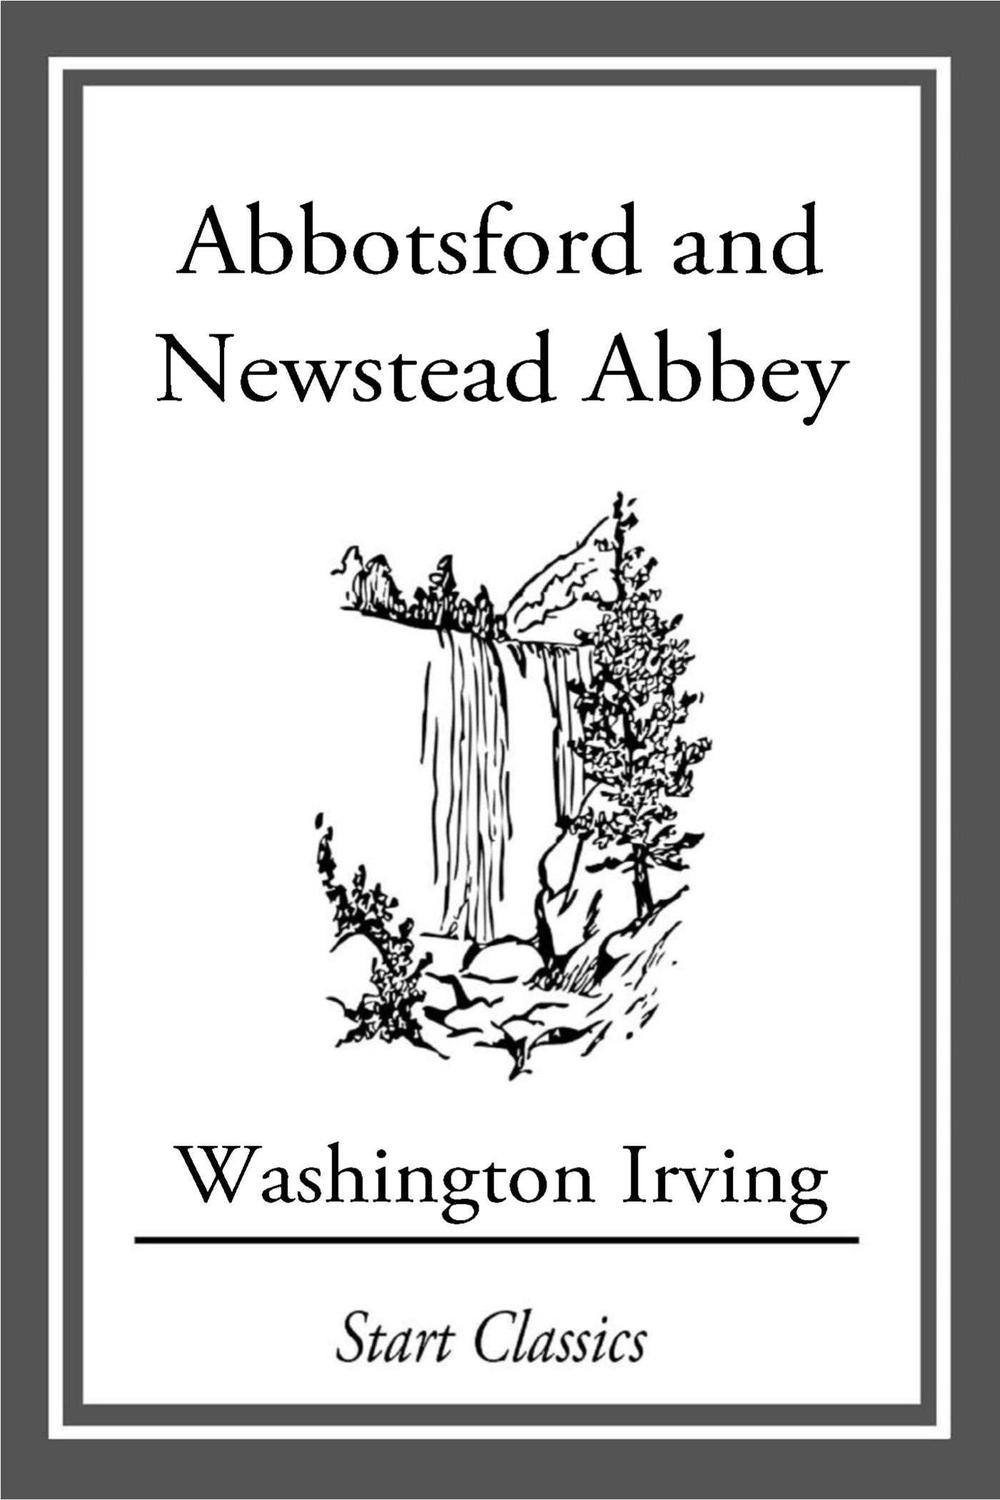 Abbotsford and Newstead Abbey - Washington Irving,,